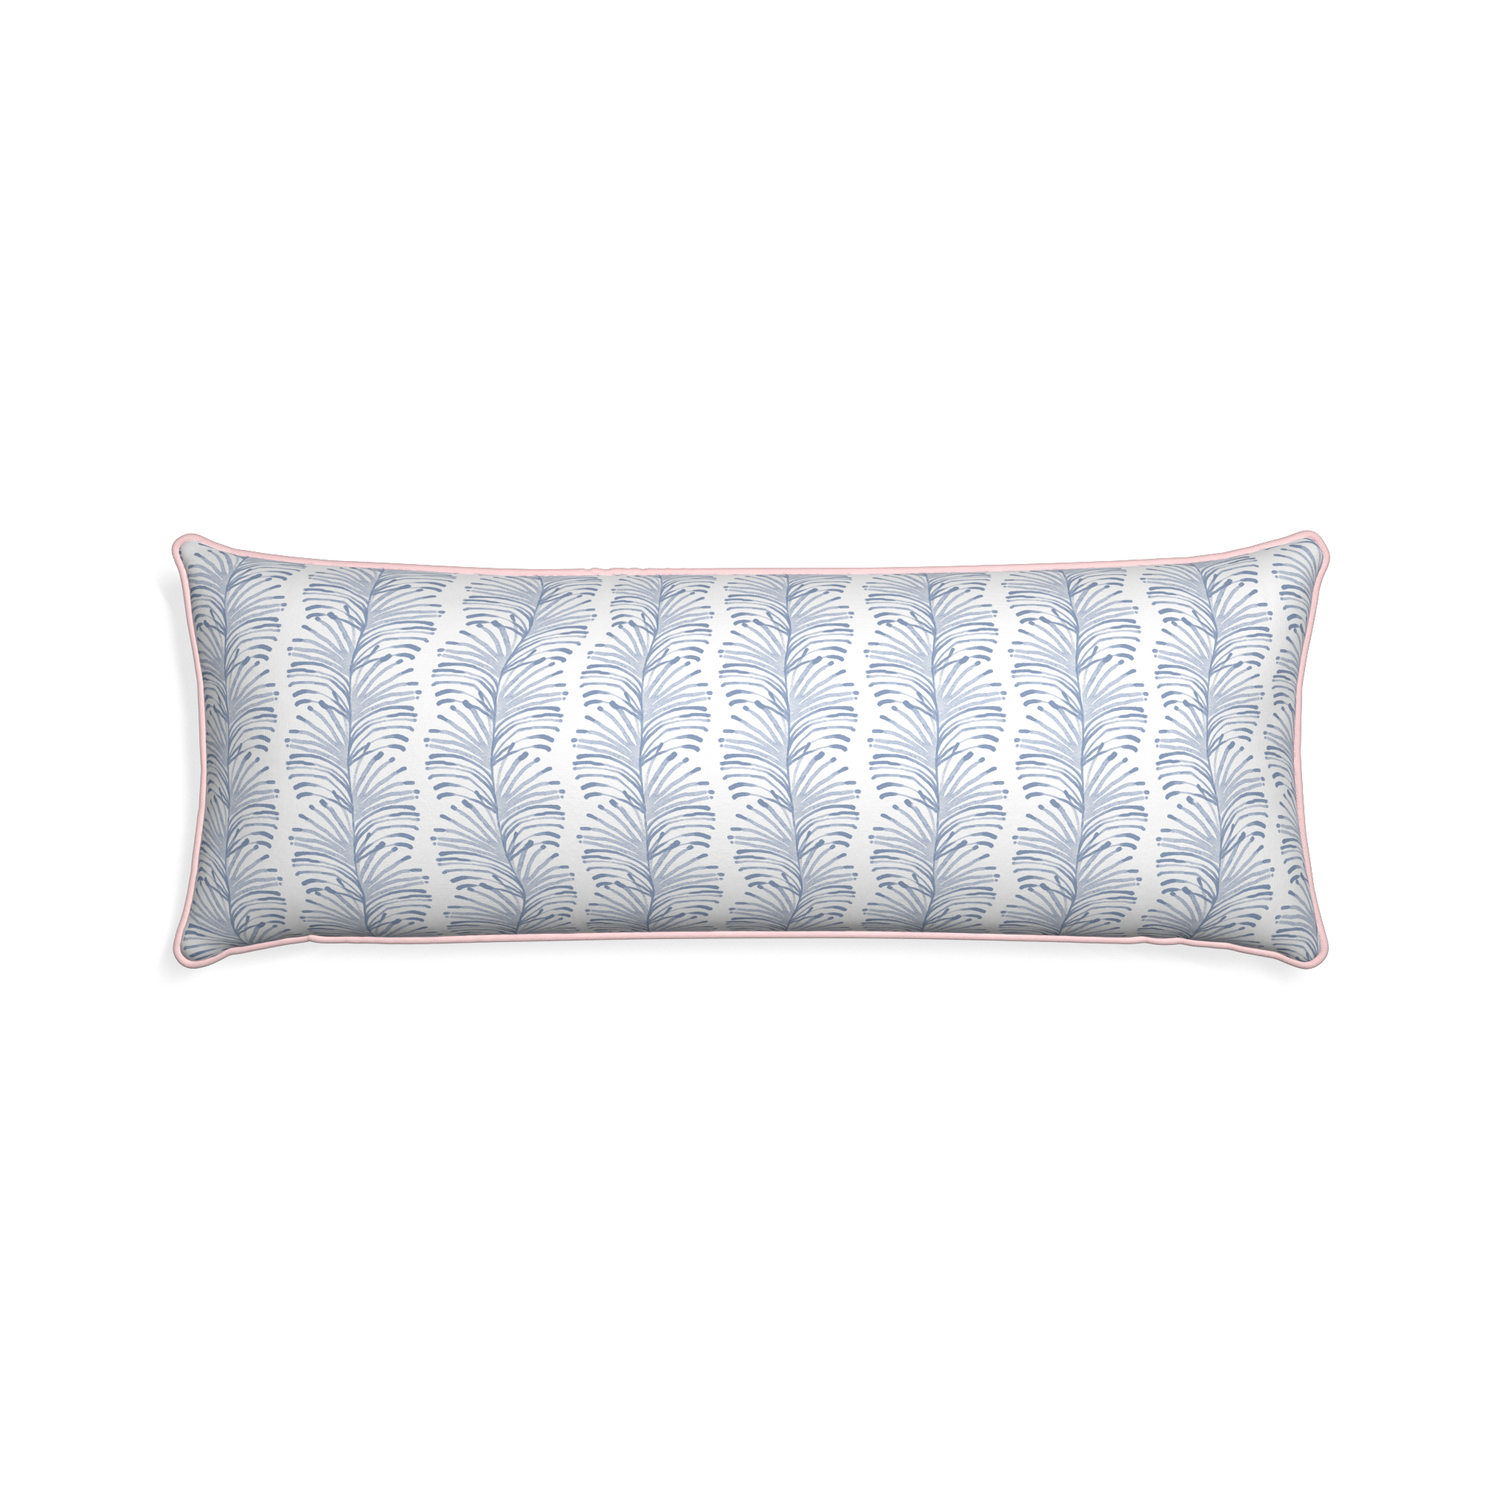 Xl-lumbar emma sky custom pillow with petal piping on white background